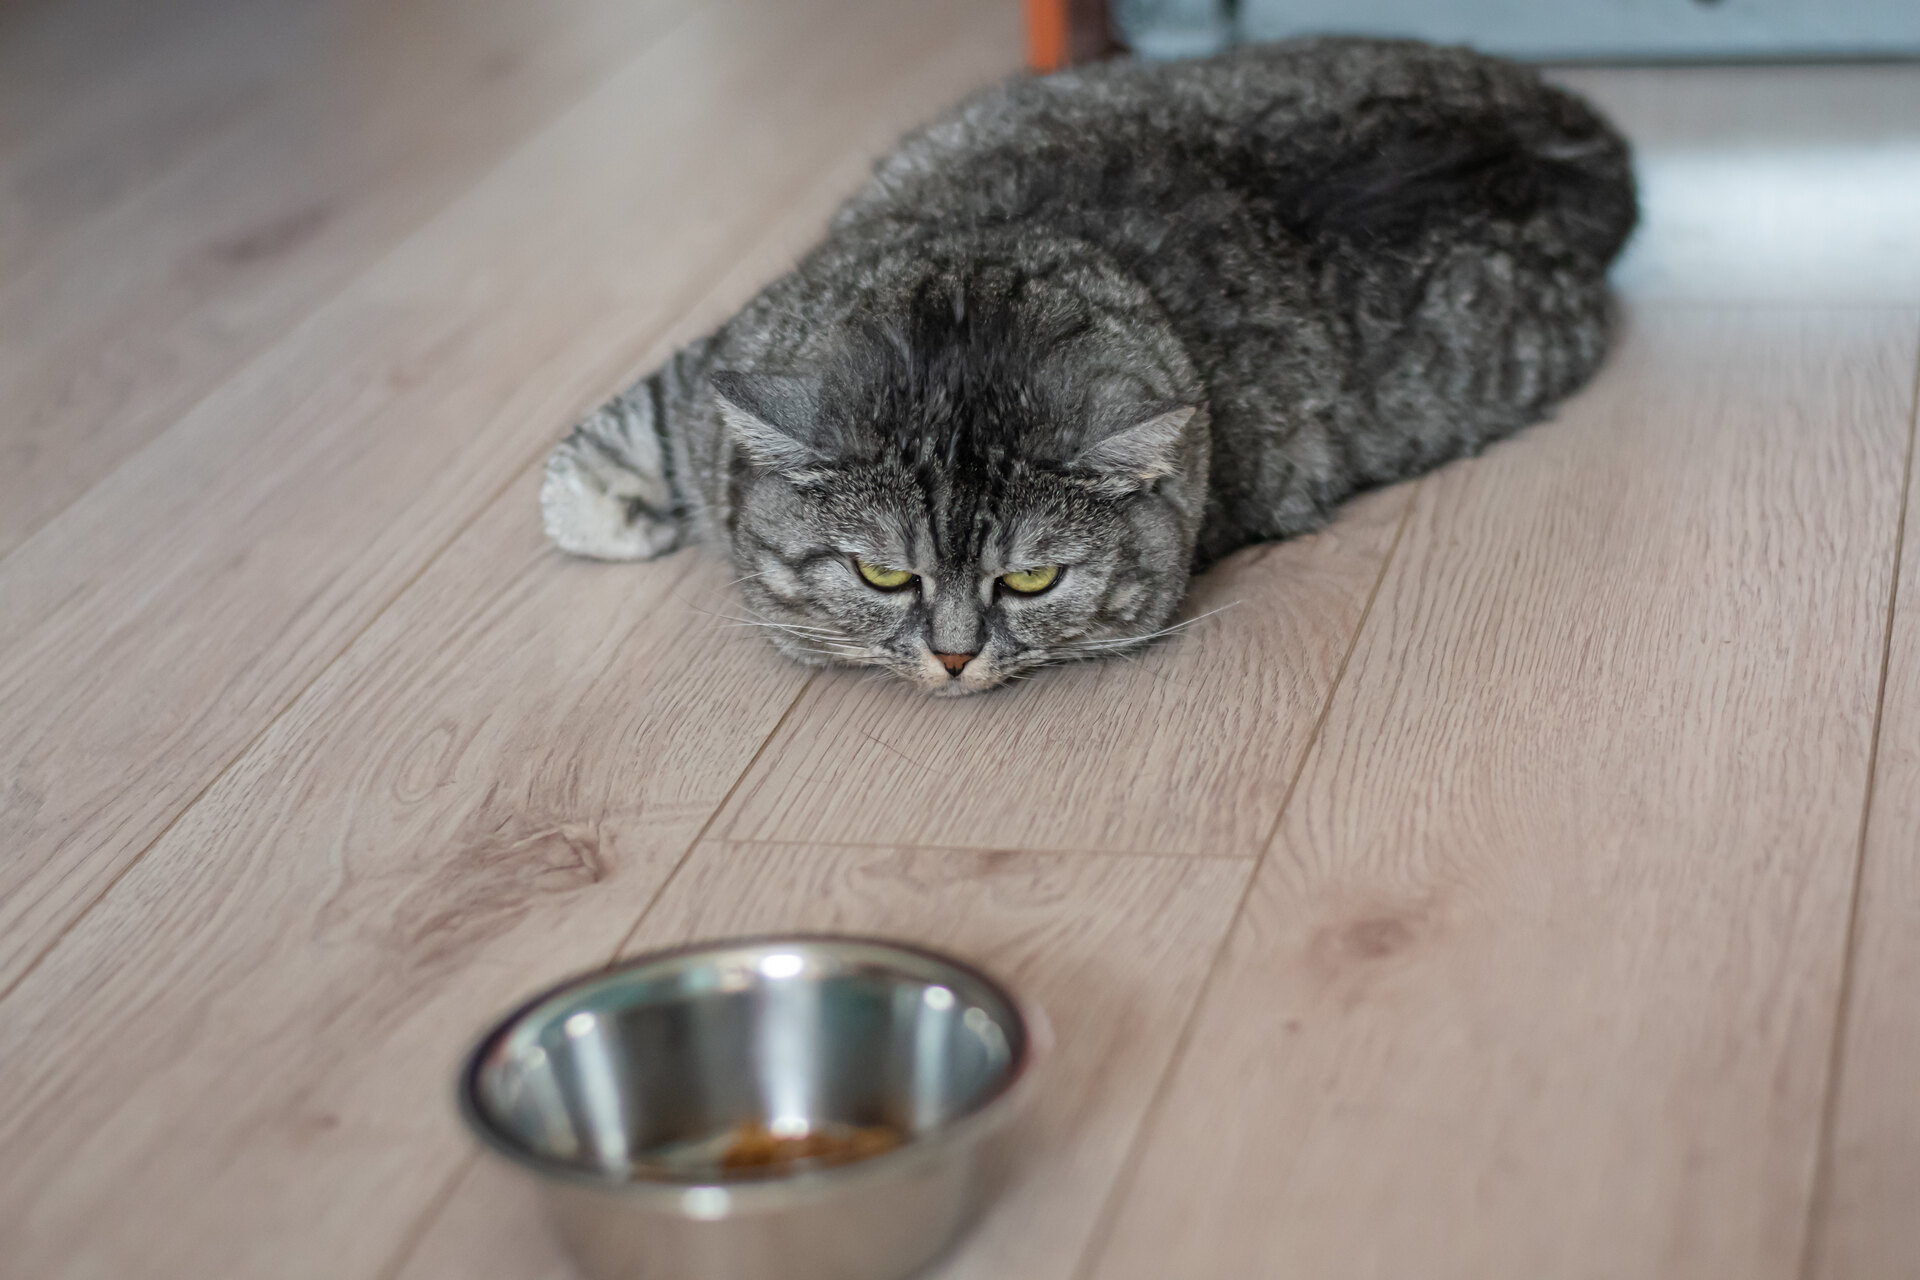 A cat lying on the floor in front of their food bowl